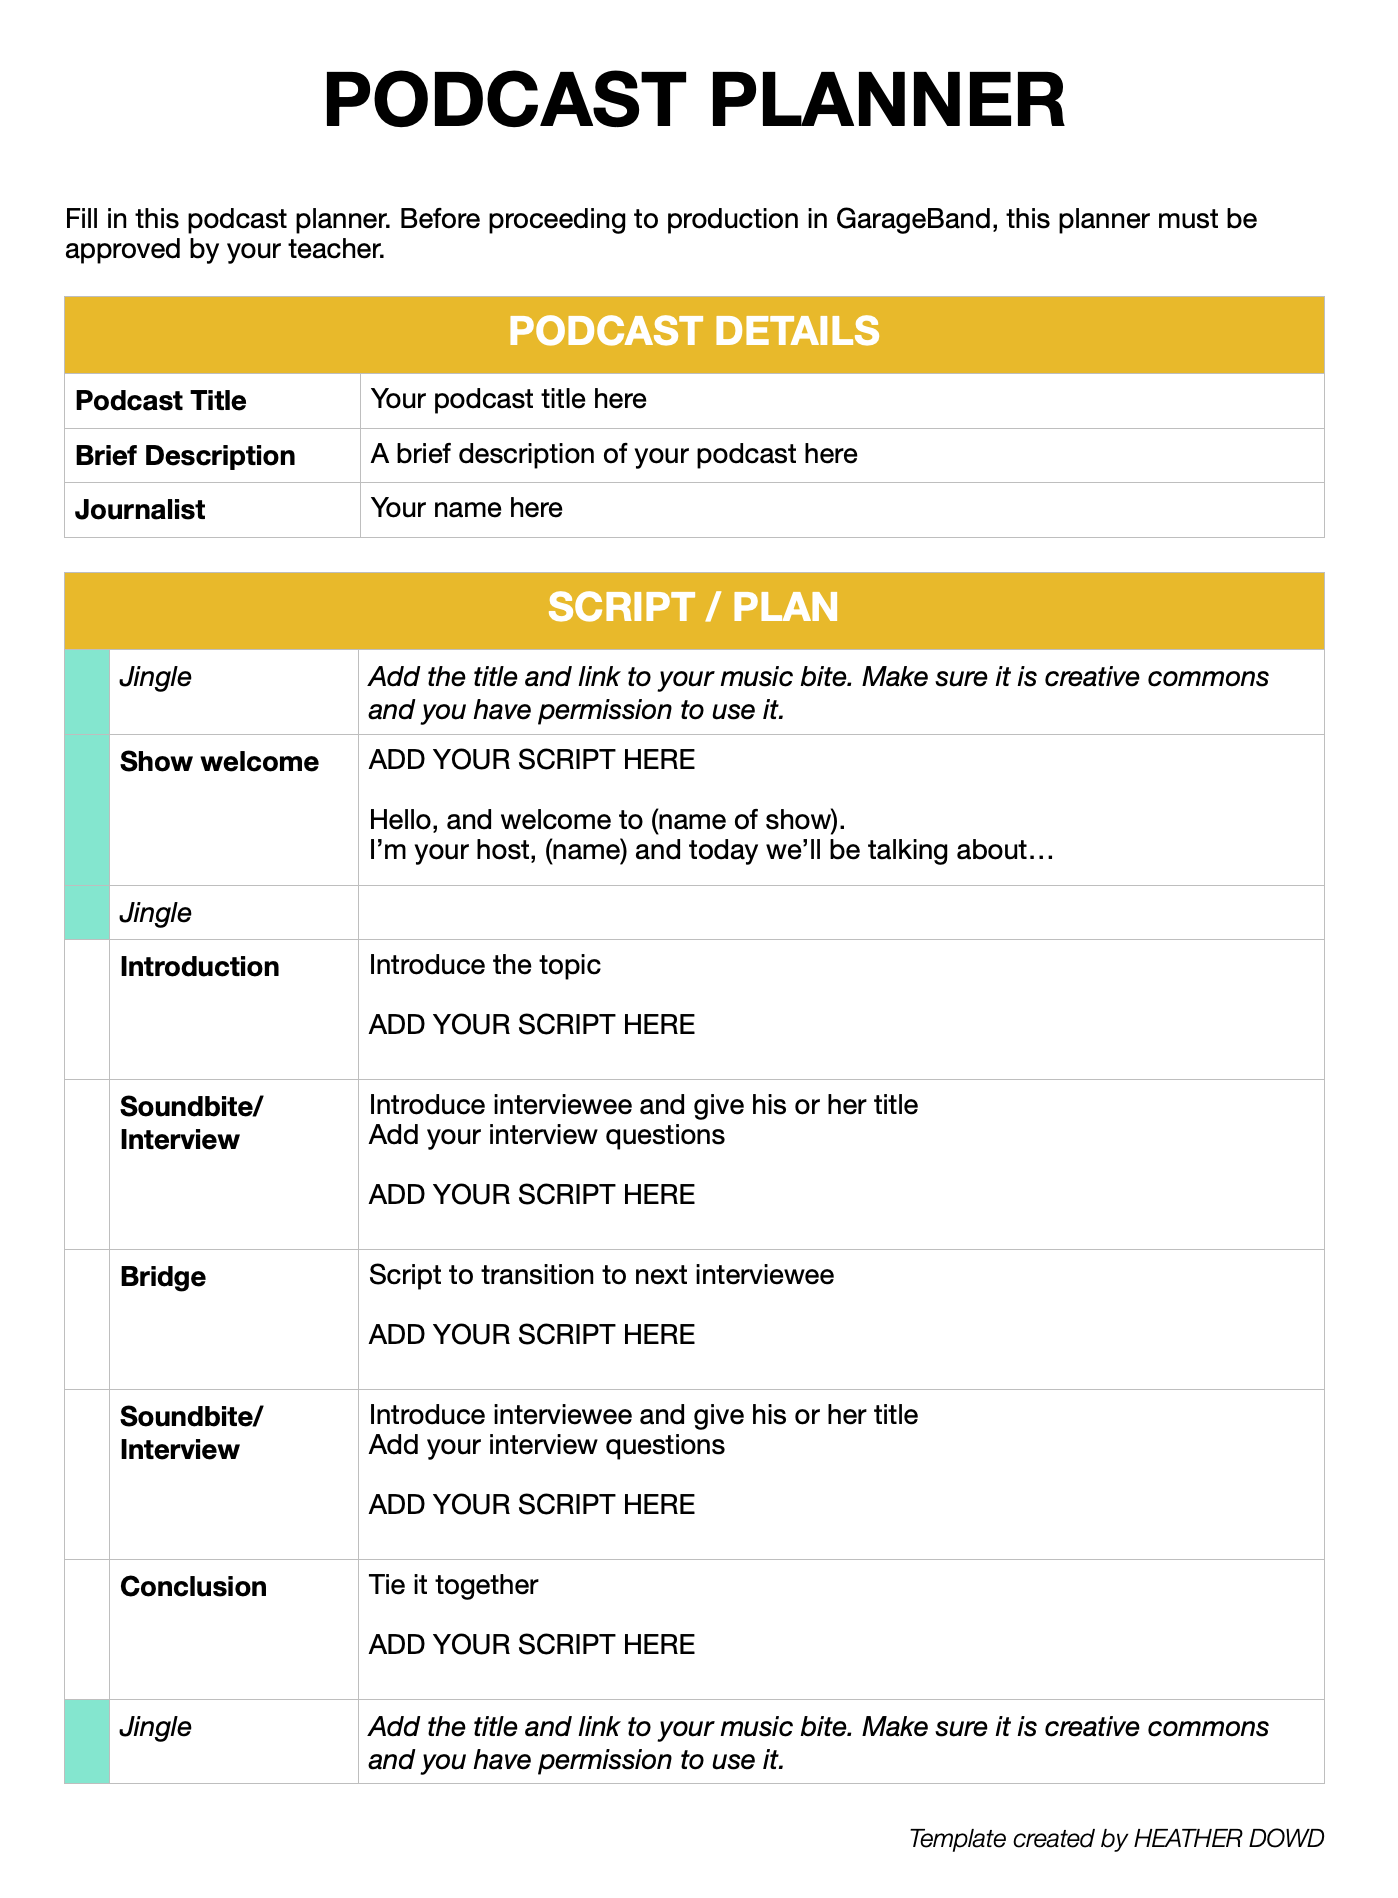 Podcast planner template file for students to copy and fill out.